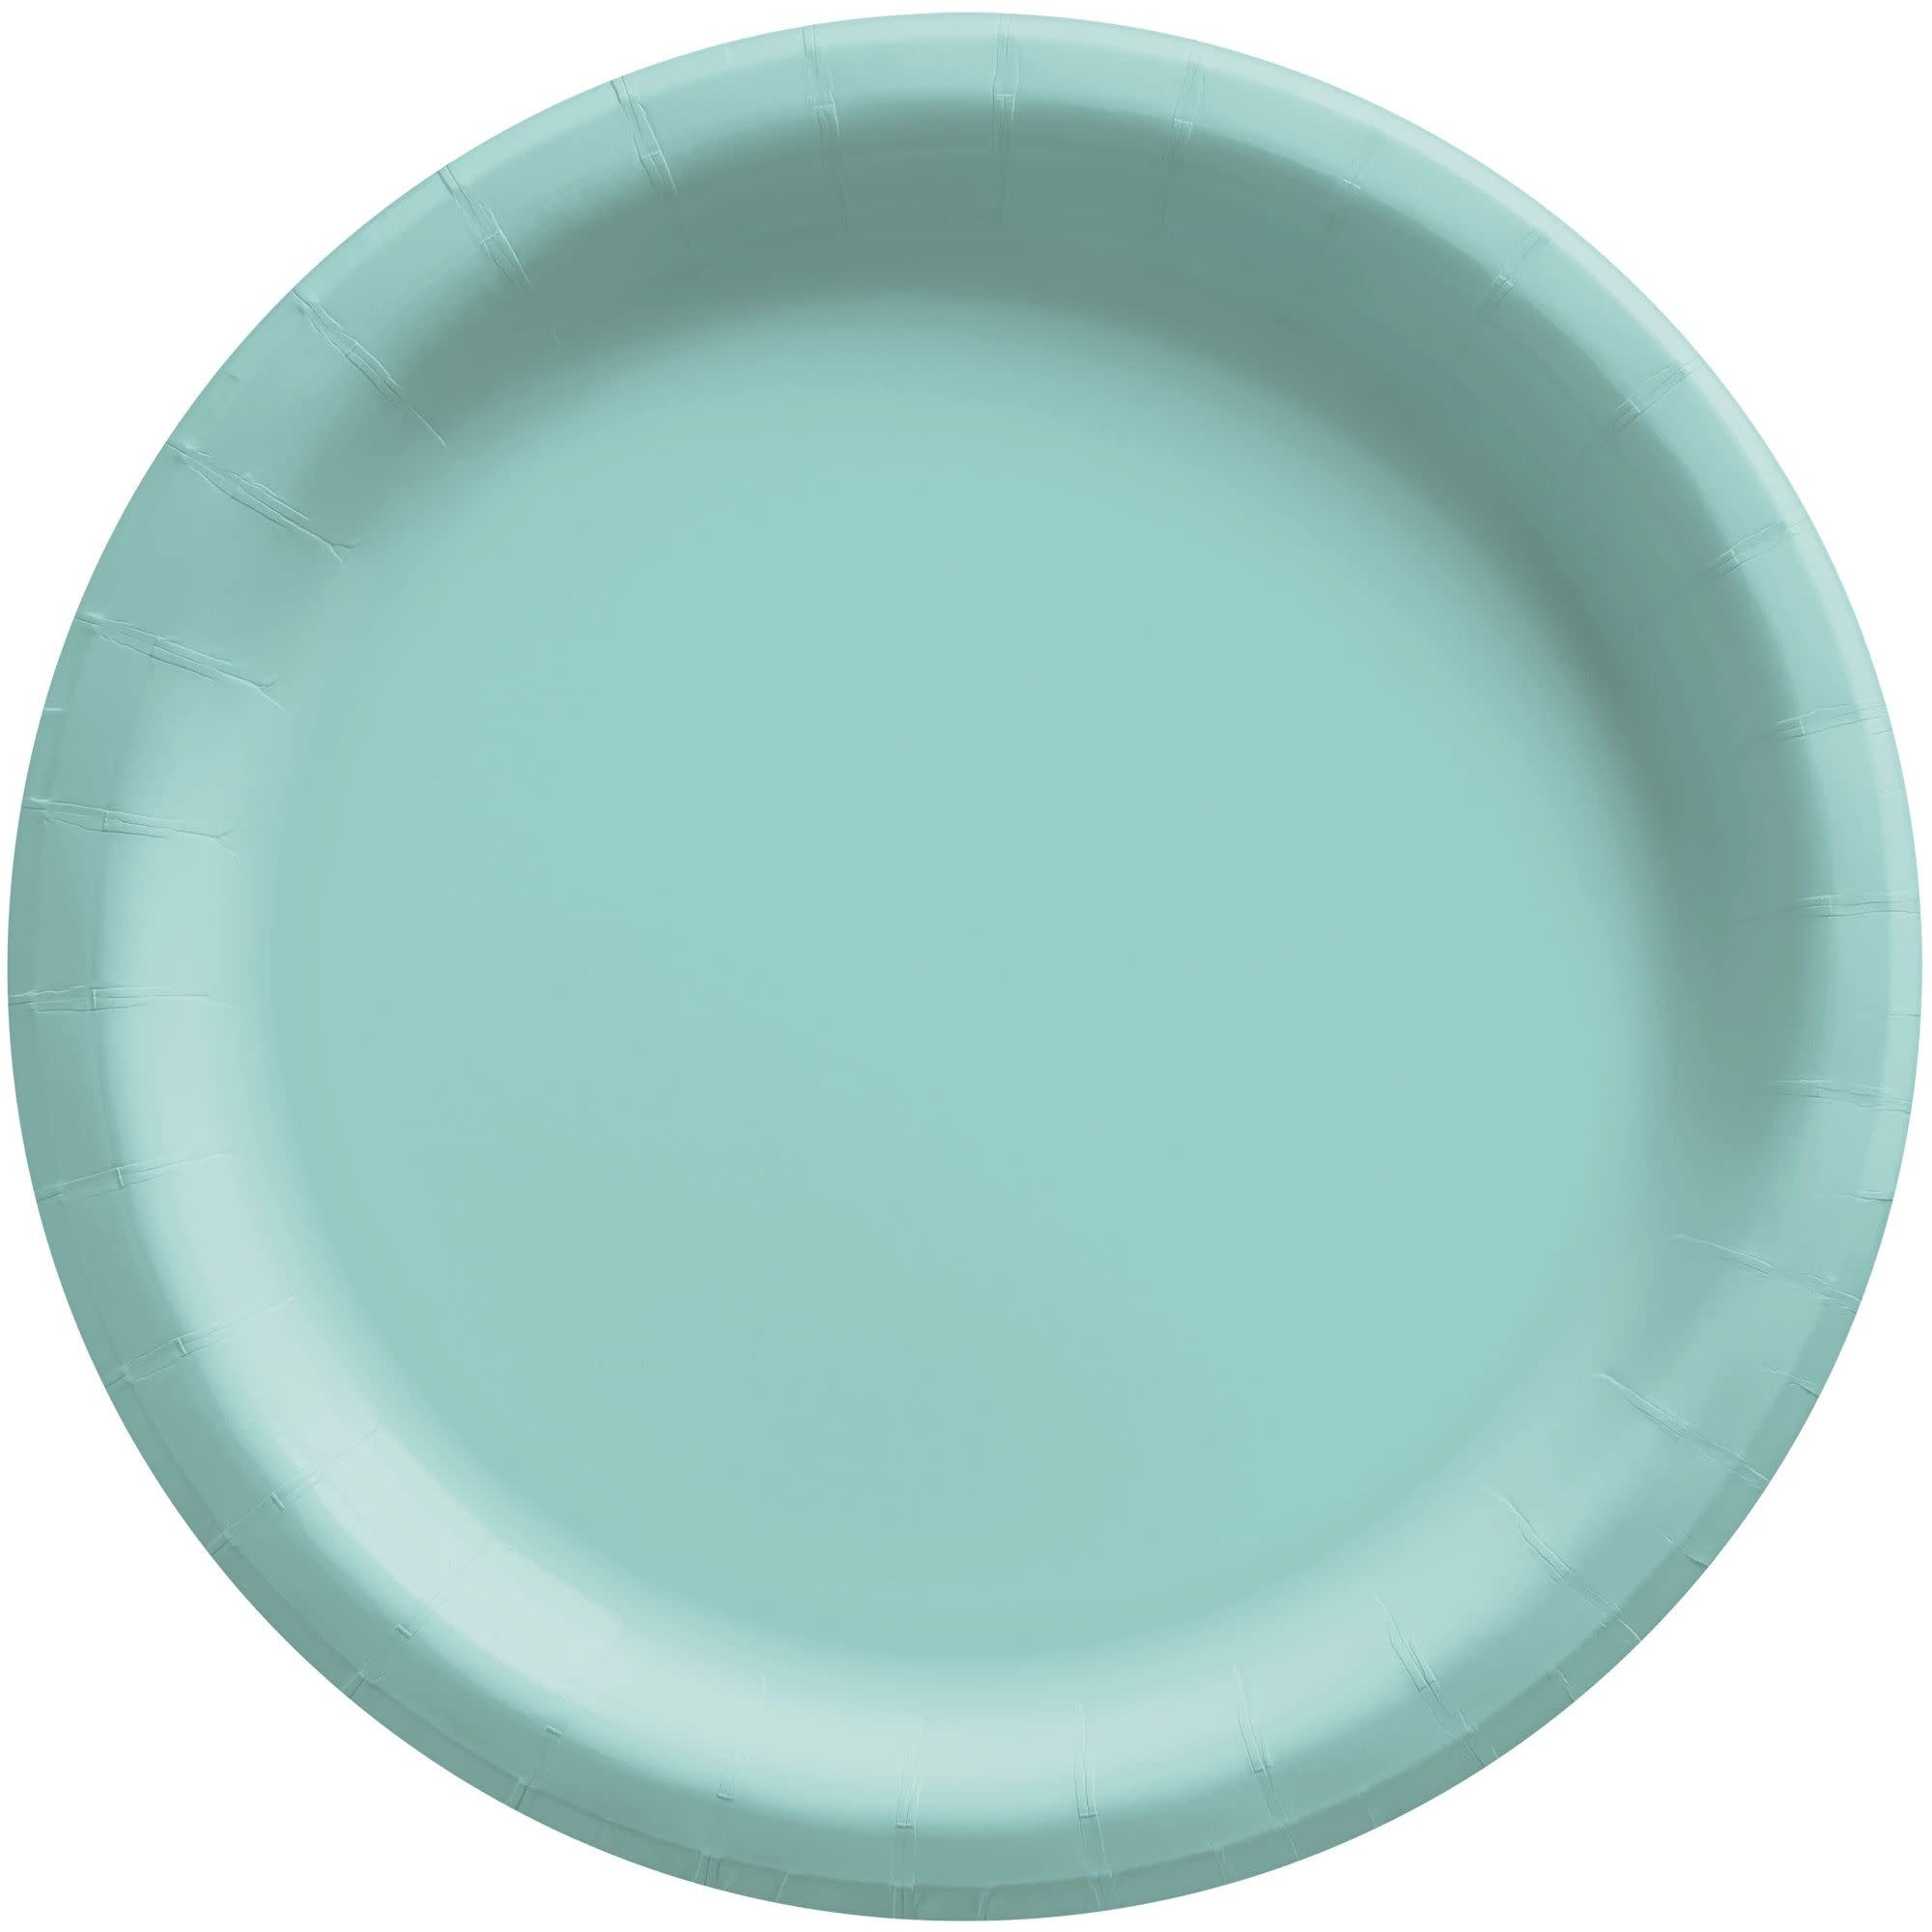 6 3/4" Round Paper Plates, Mid Ct. - Robin's-Egg Blue